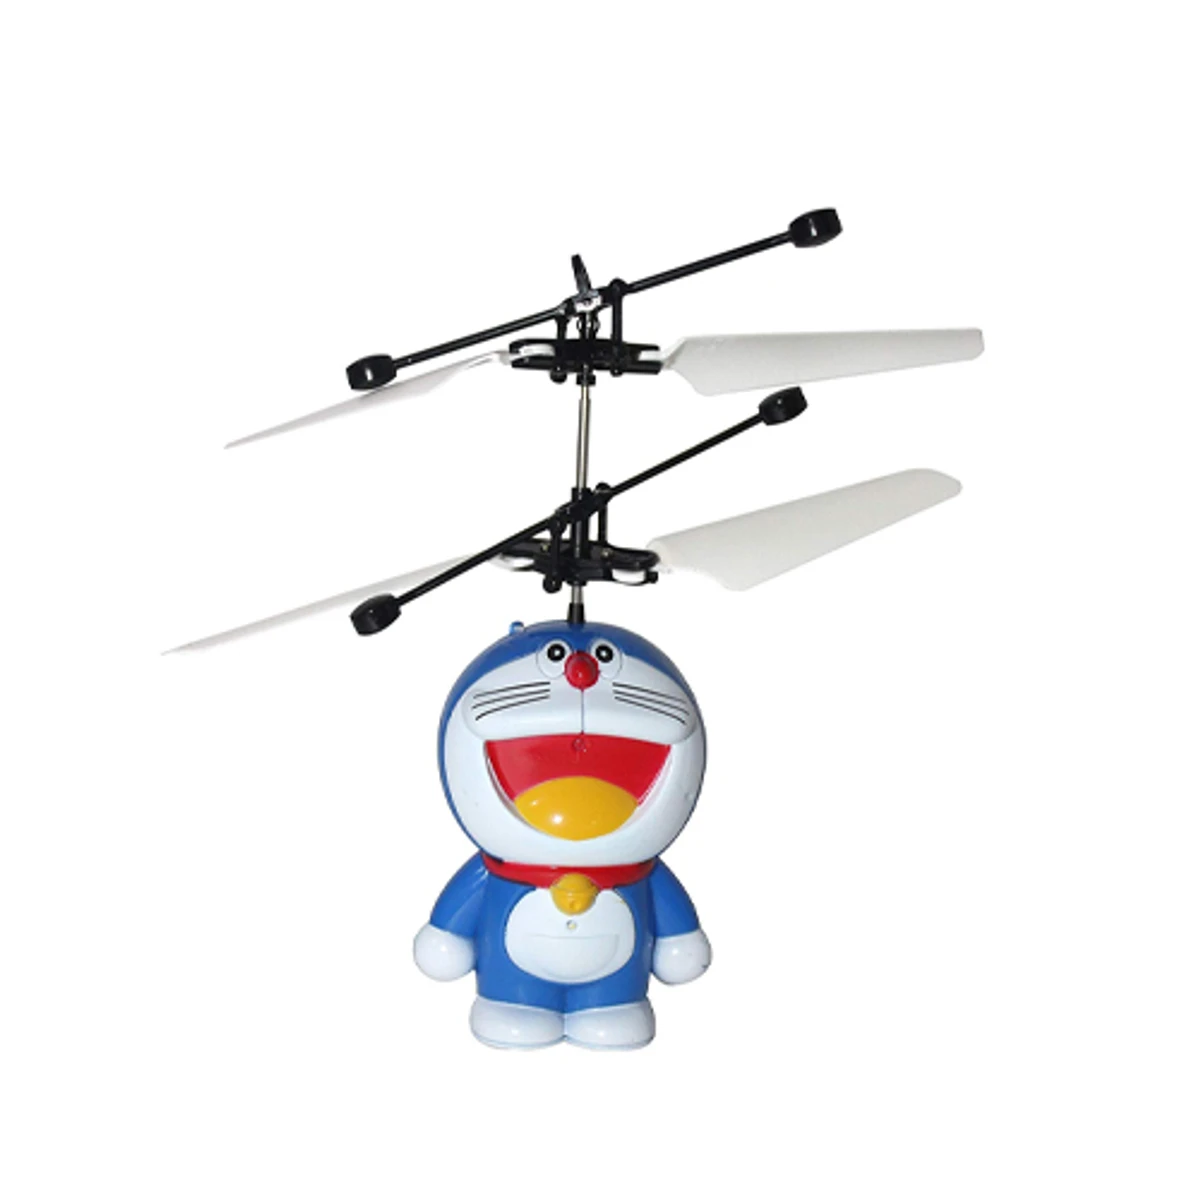 KIDS COLLECTION Flying Doraemon Toy with Sensor Based Flyer (Micro USB Chargeable)